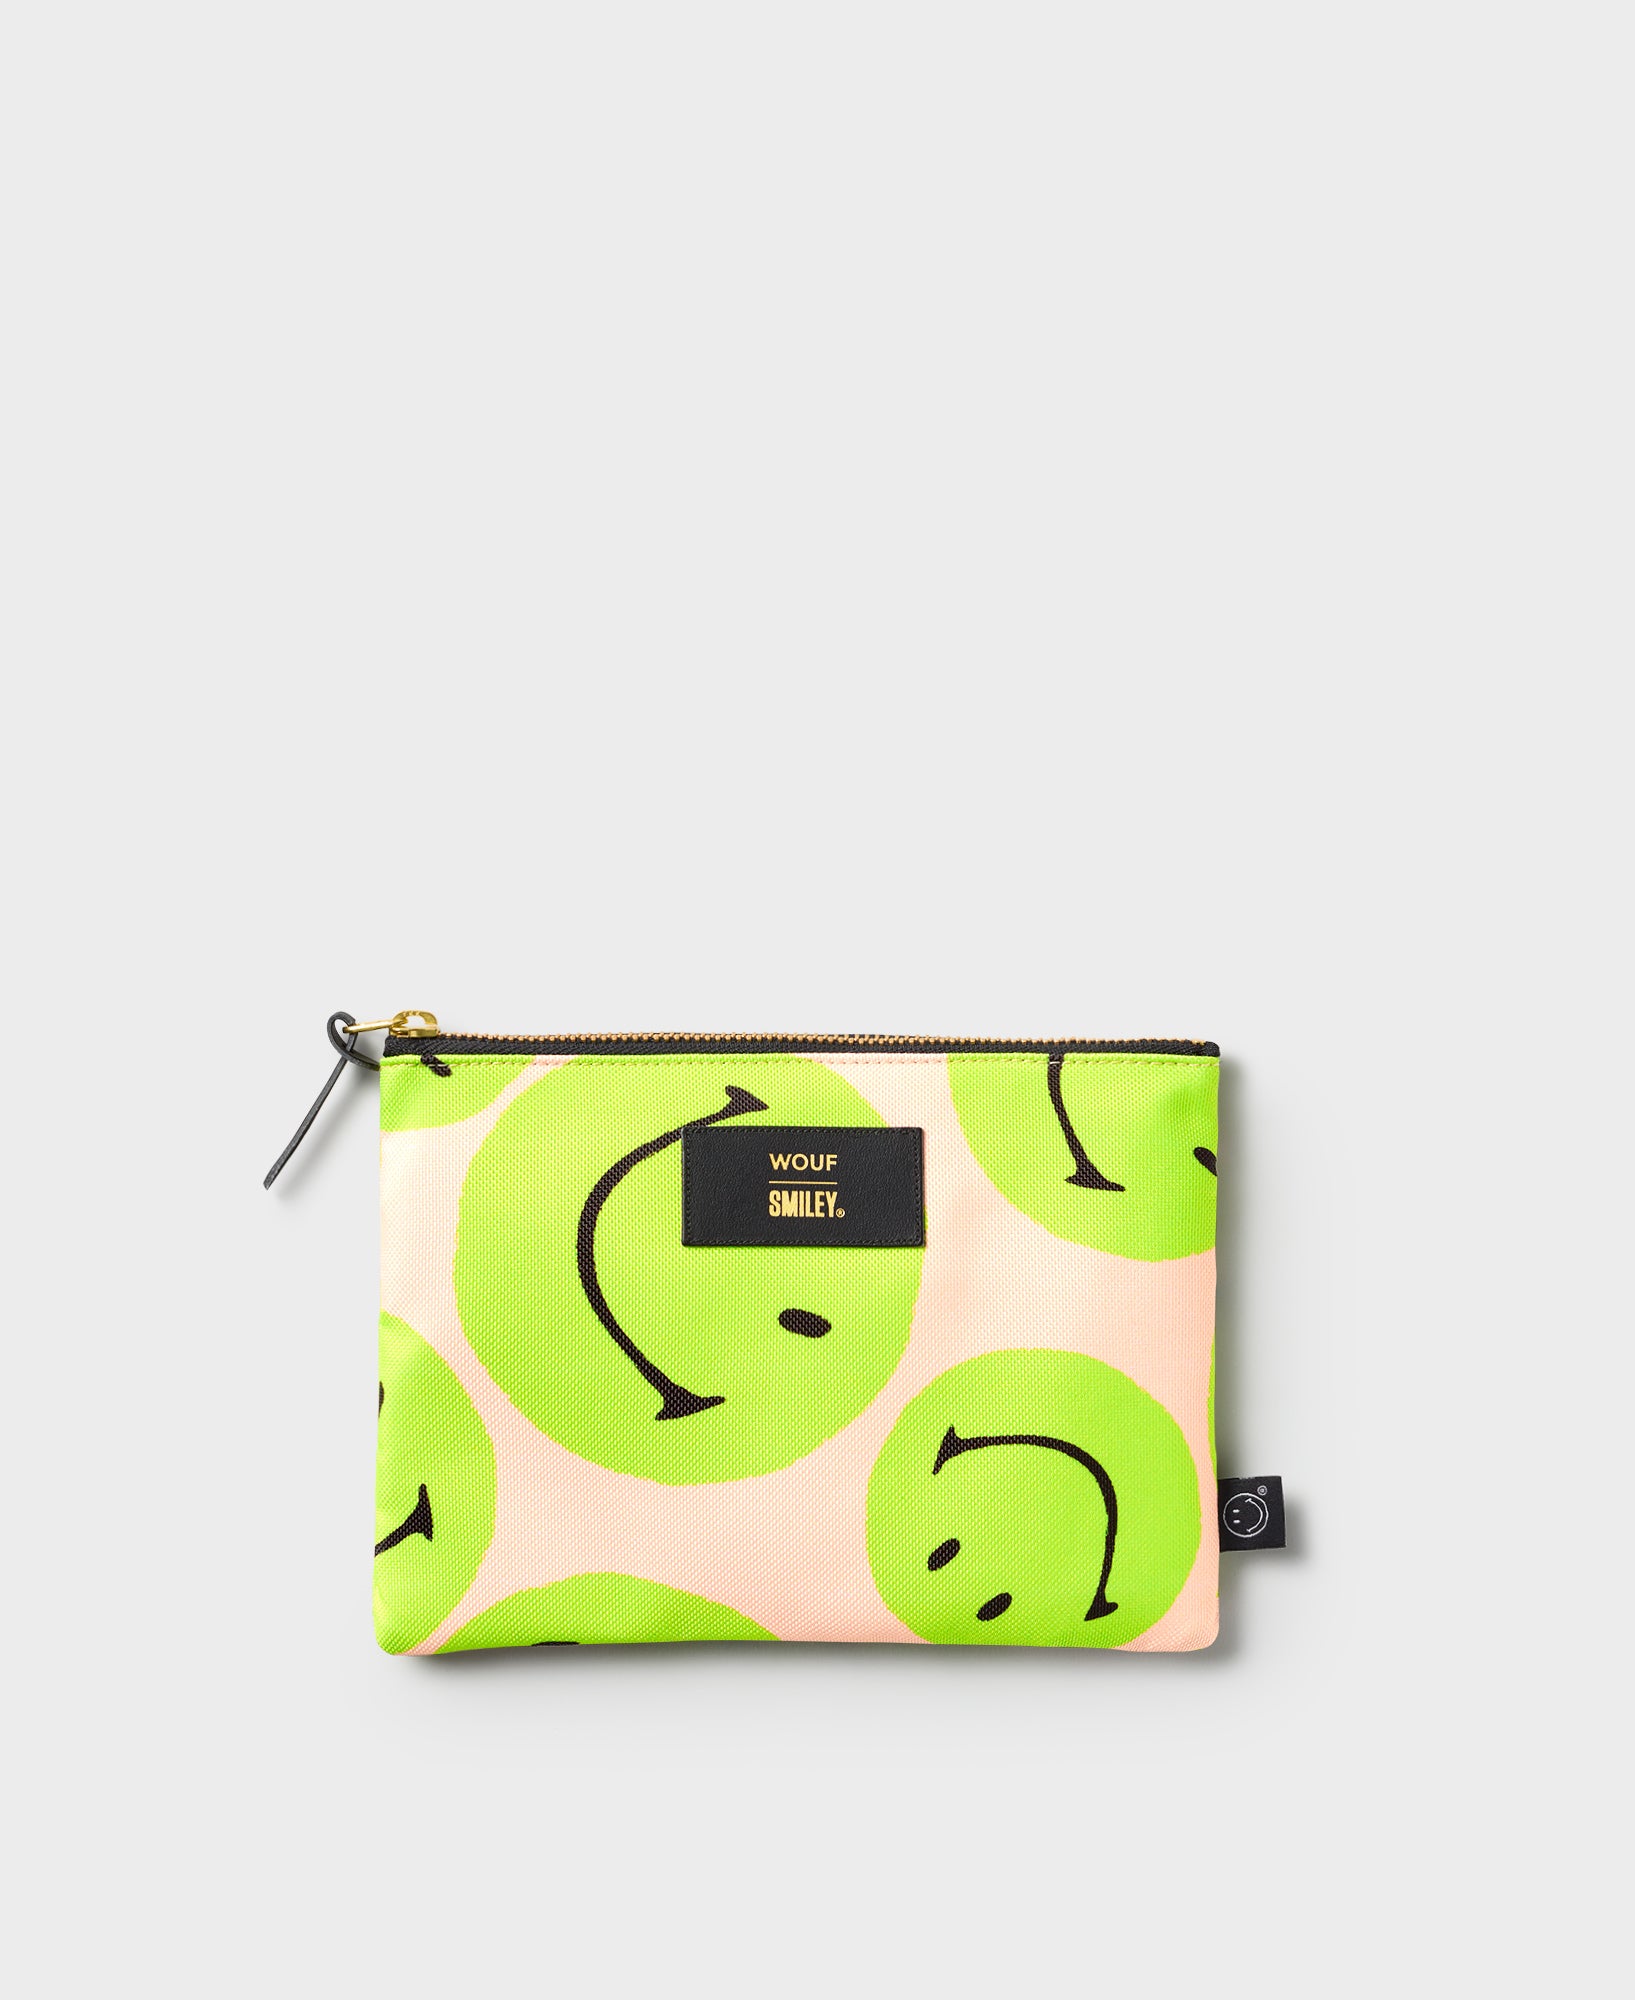 Smiley Pouch